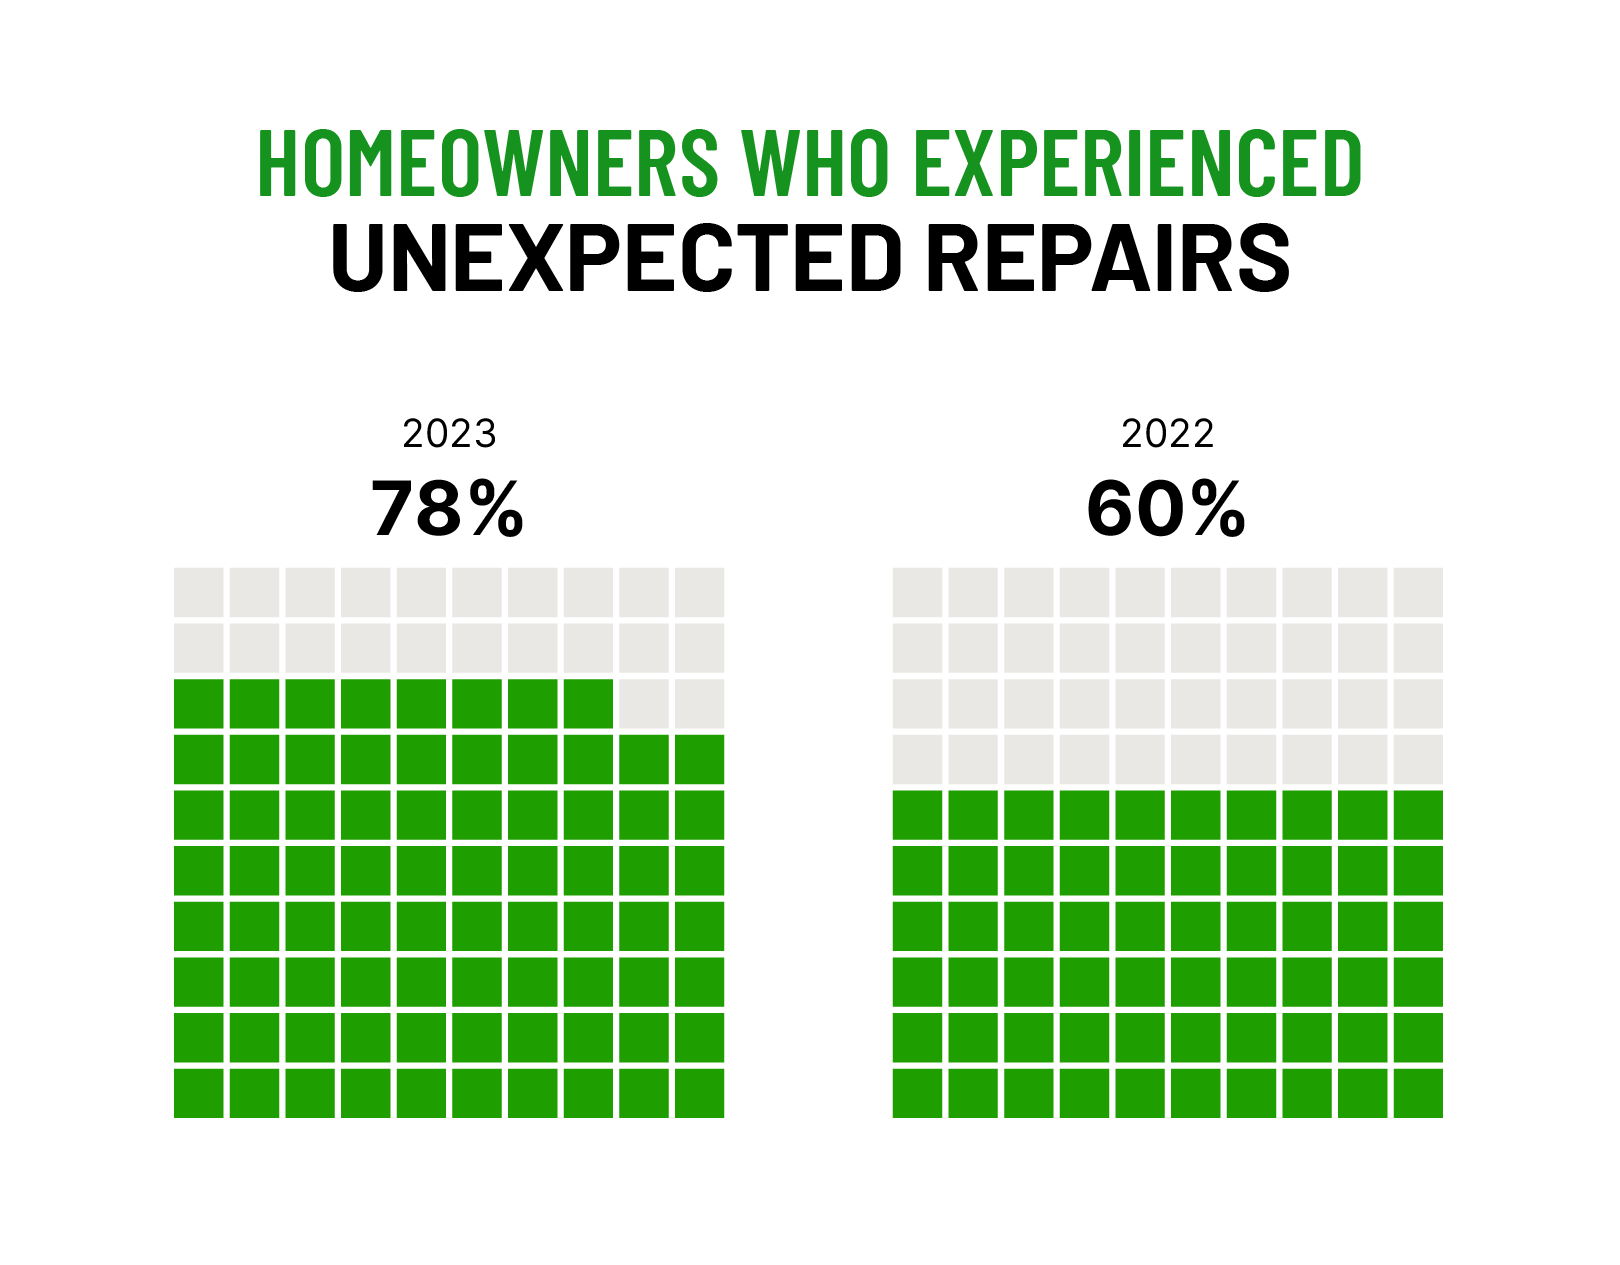 comparison of homeowners who experienced unexpected repairs from the 2022 report and the 2023 report